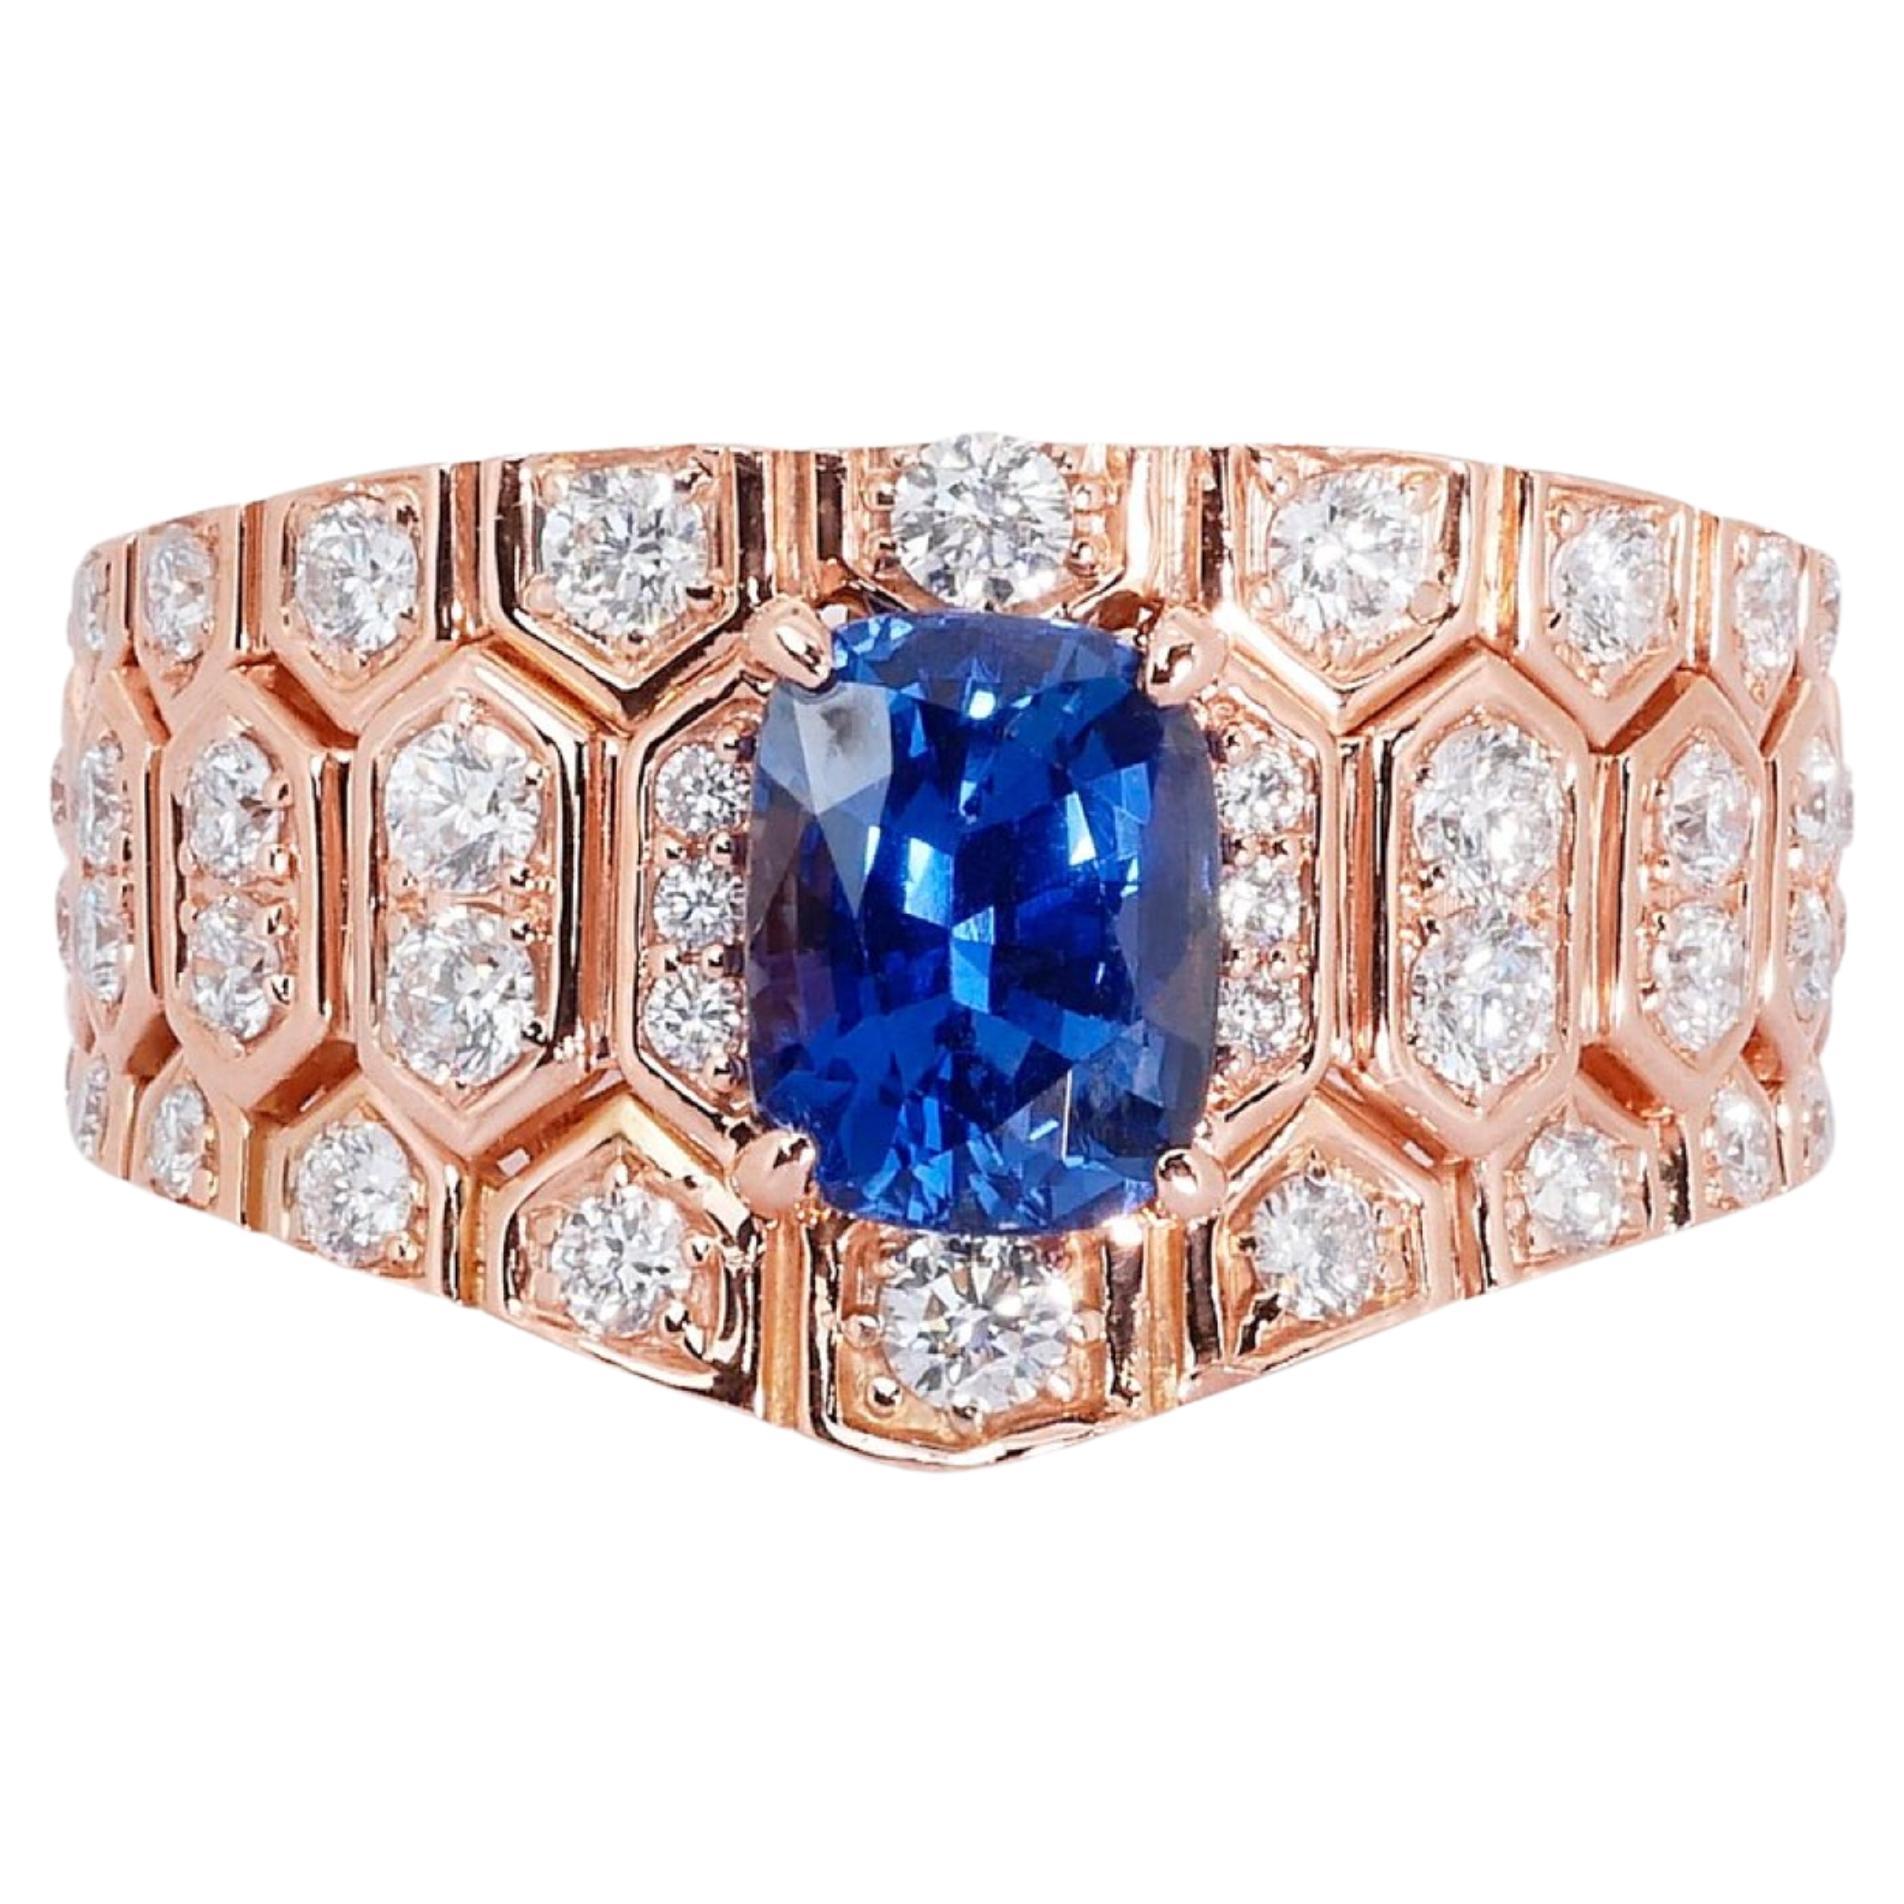 Gorgeous 14k Pink Gold with 2.65 total carat of Natural Sapphire and Diamond For Sale